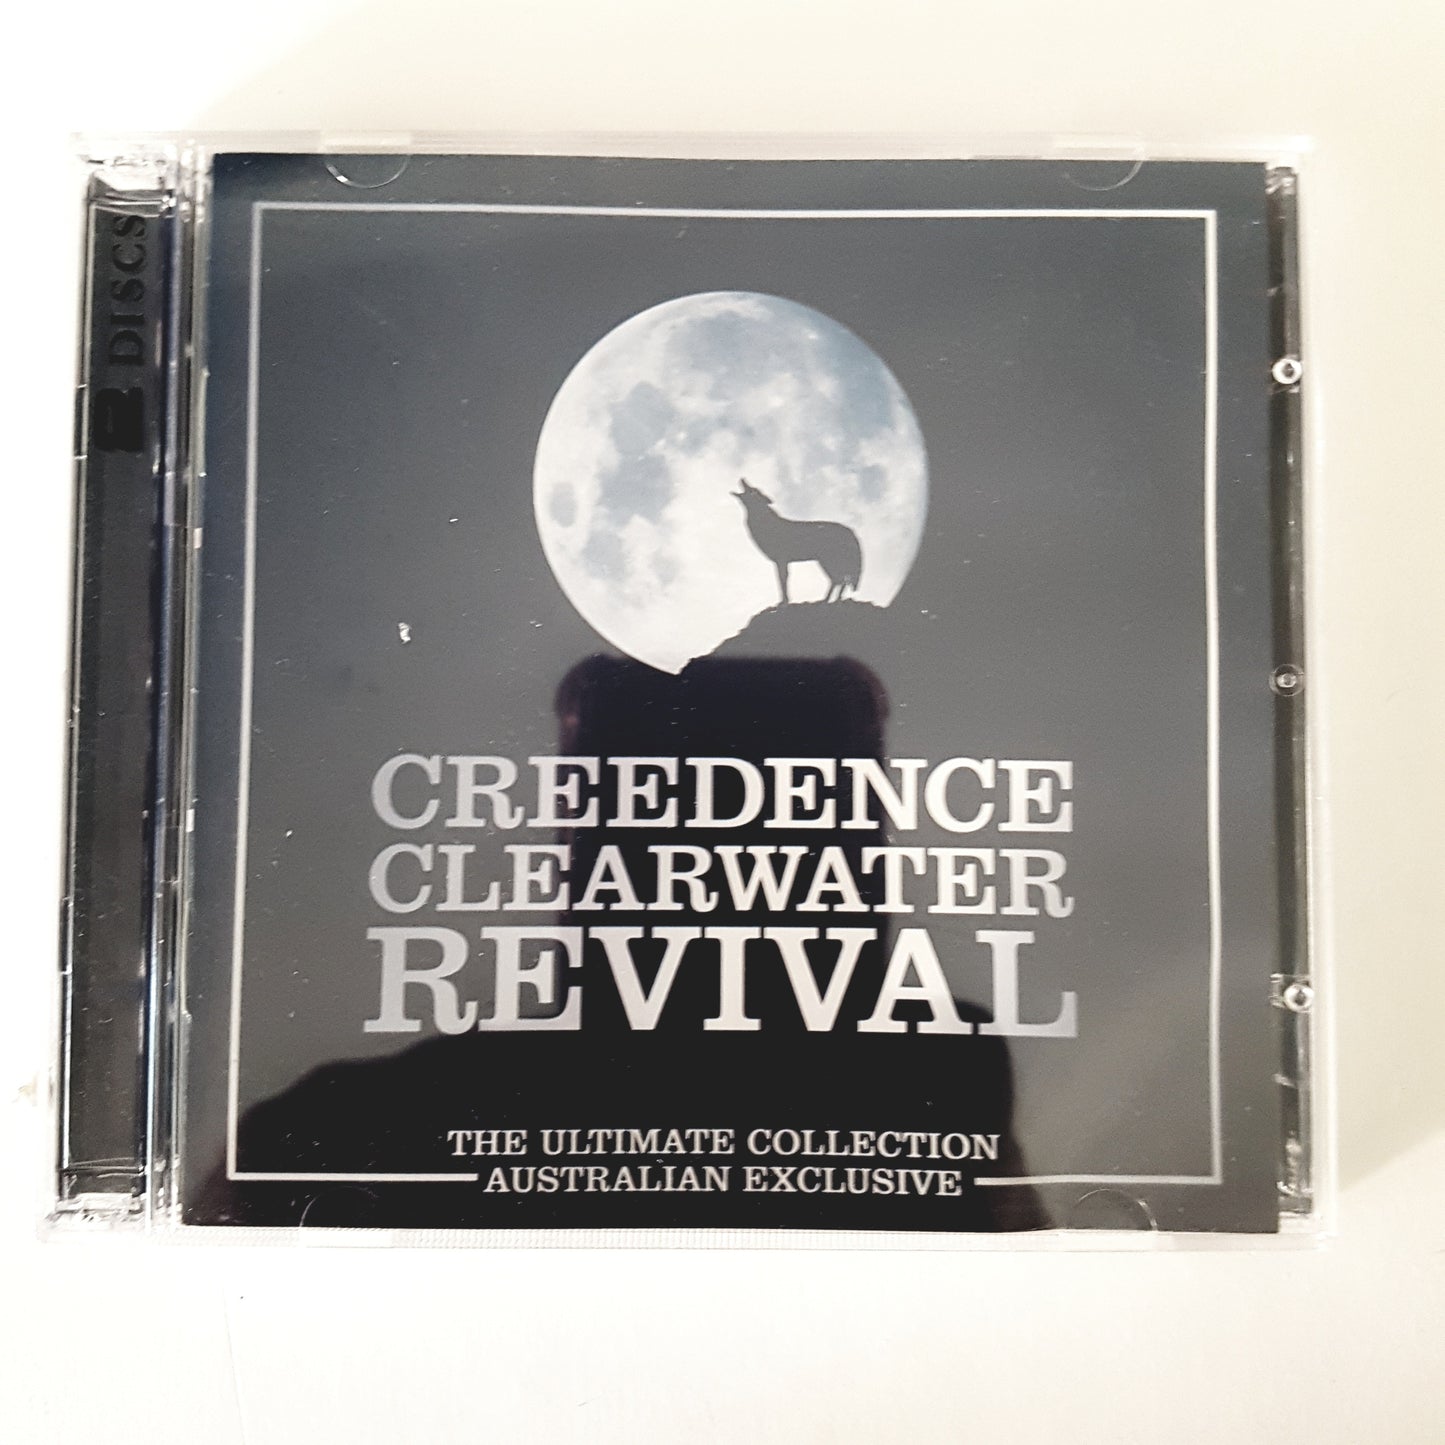 Creedence Clearwater Revival, The Ultimate Collection (2CD's)